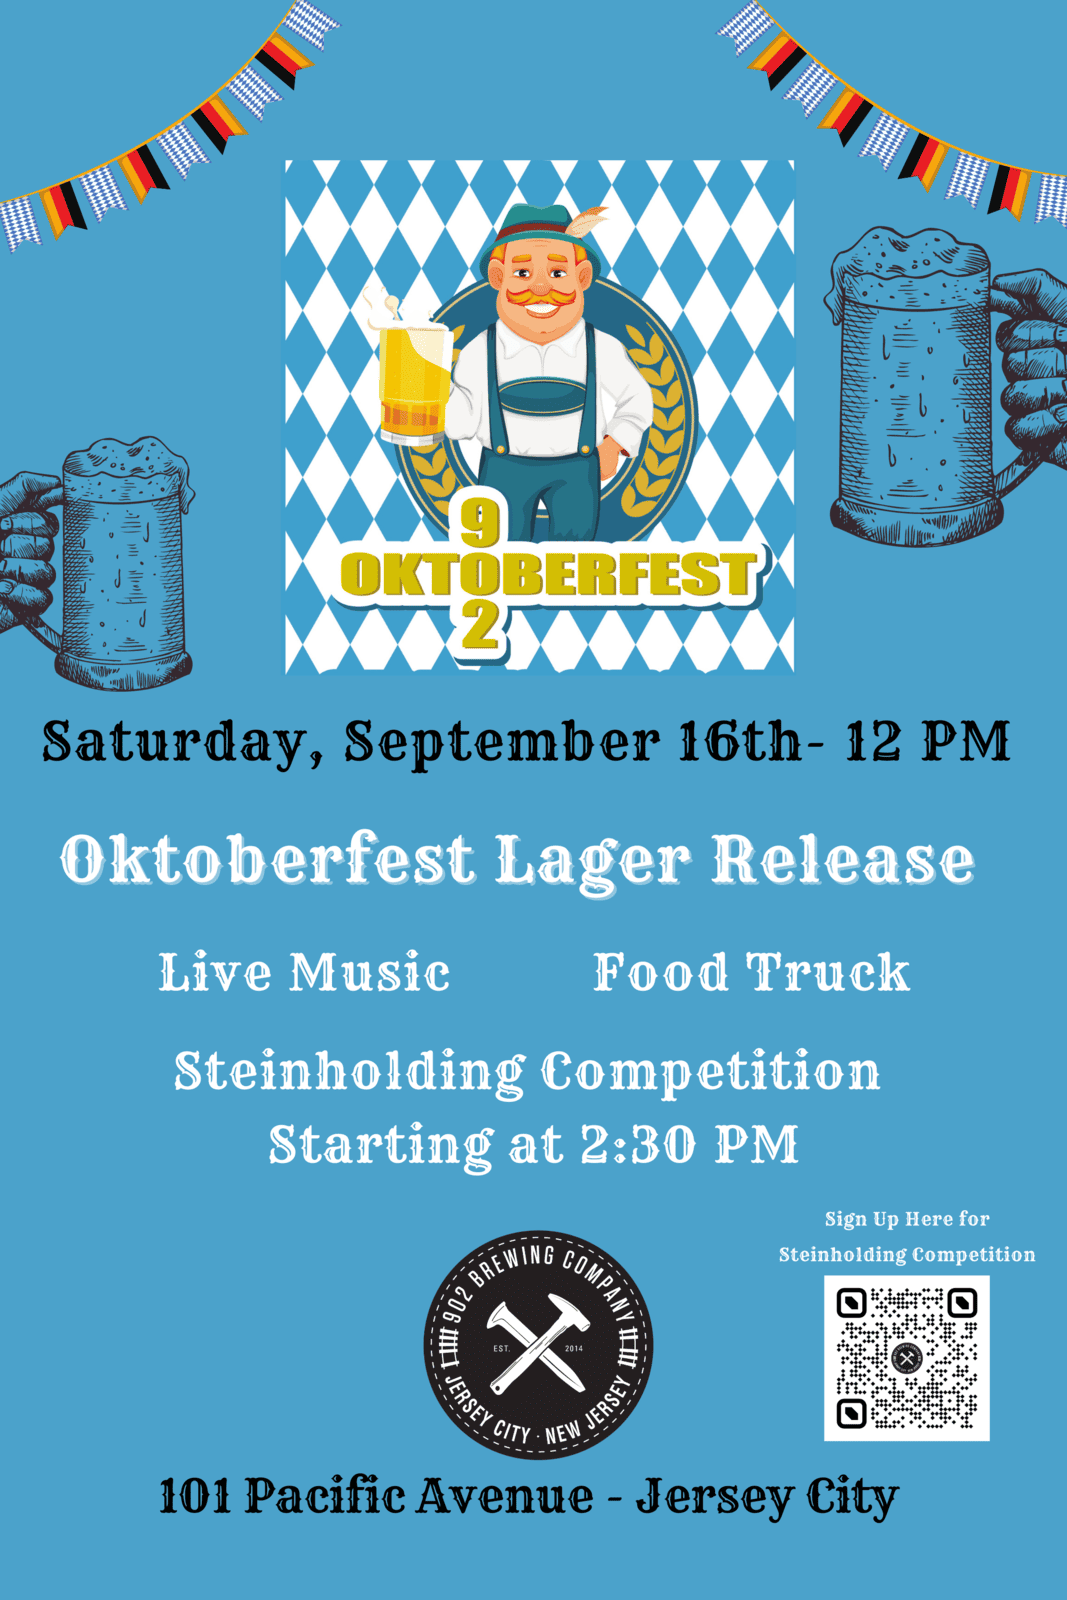 Oktoberfest & Steinholding Competition NJCB Your resource for beer